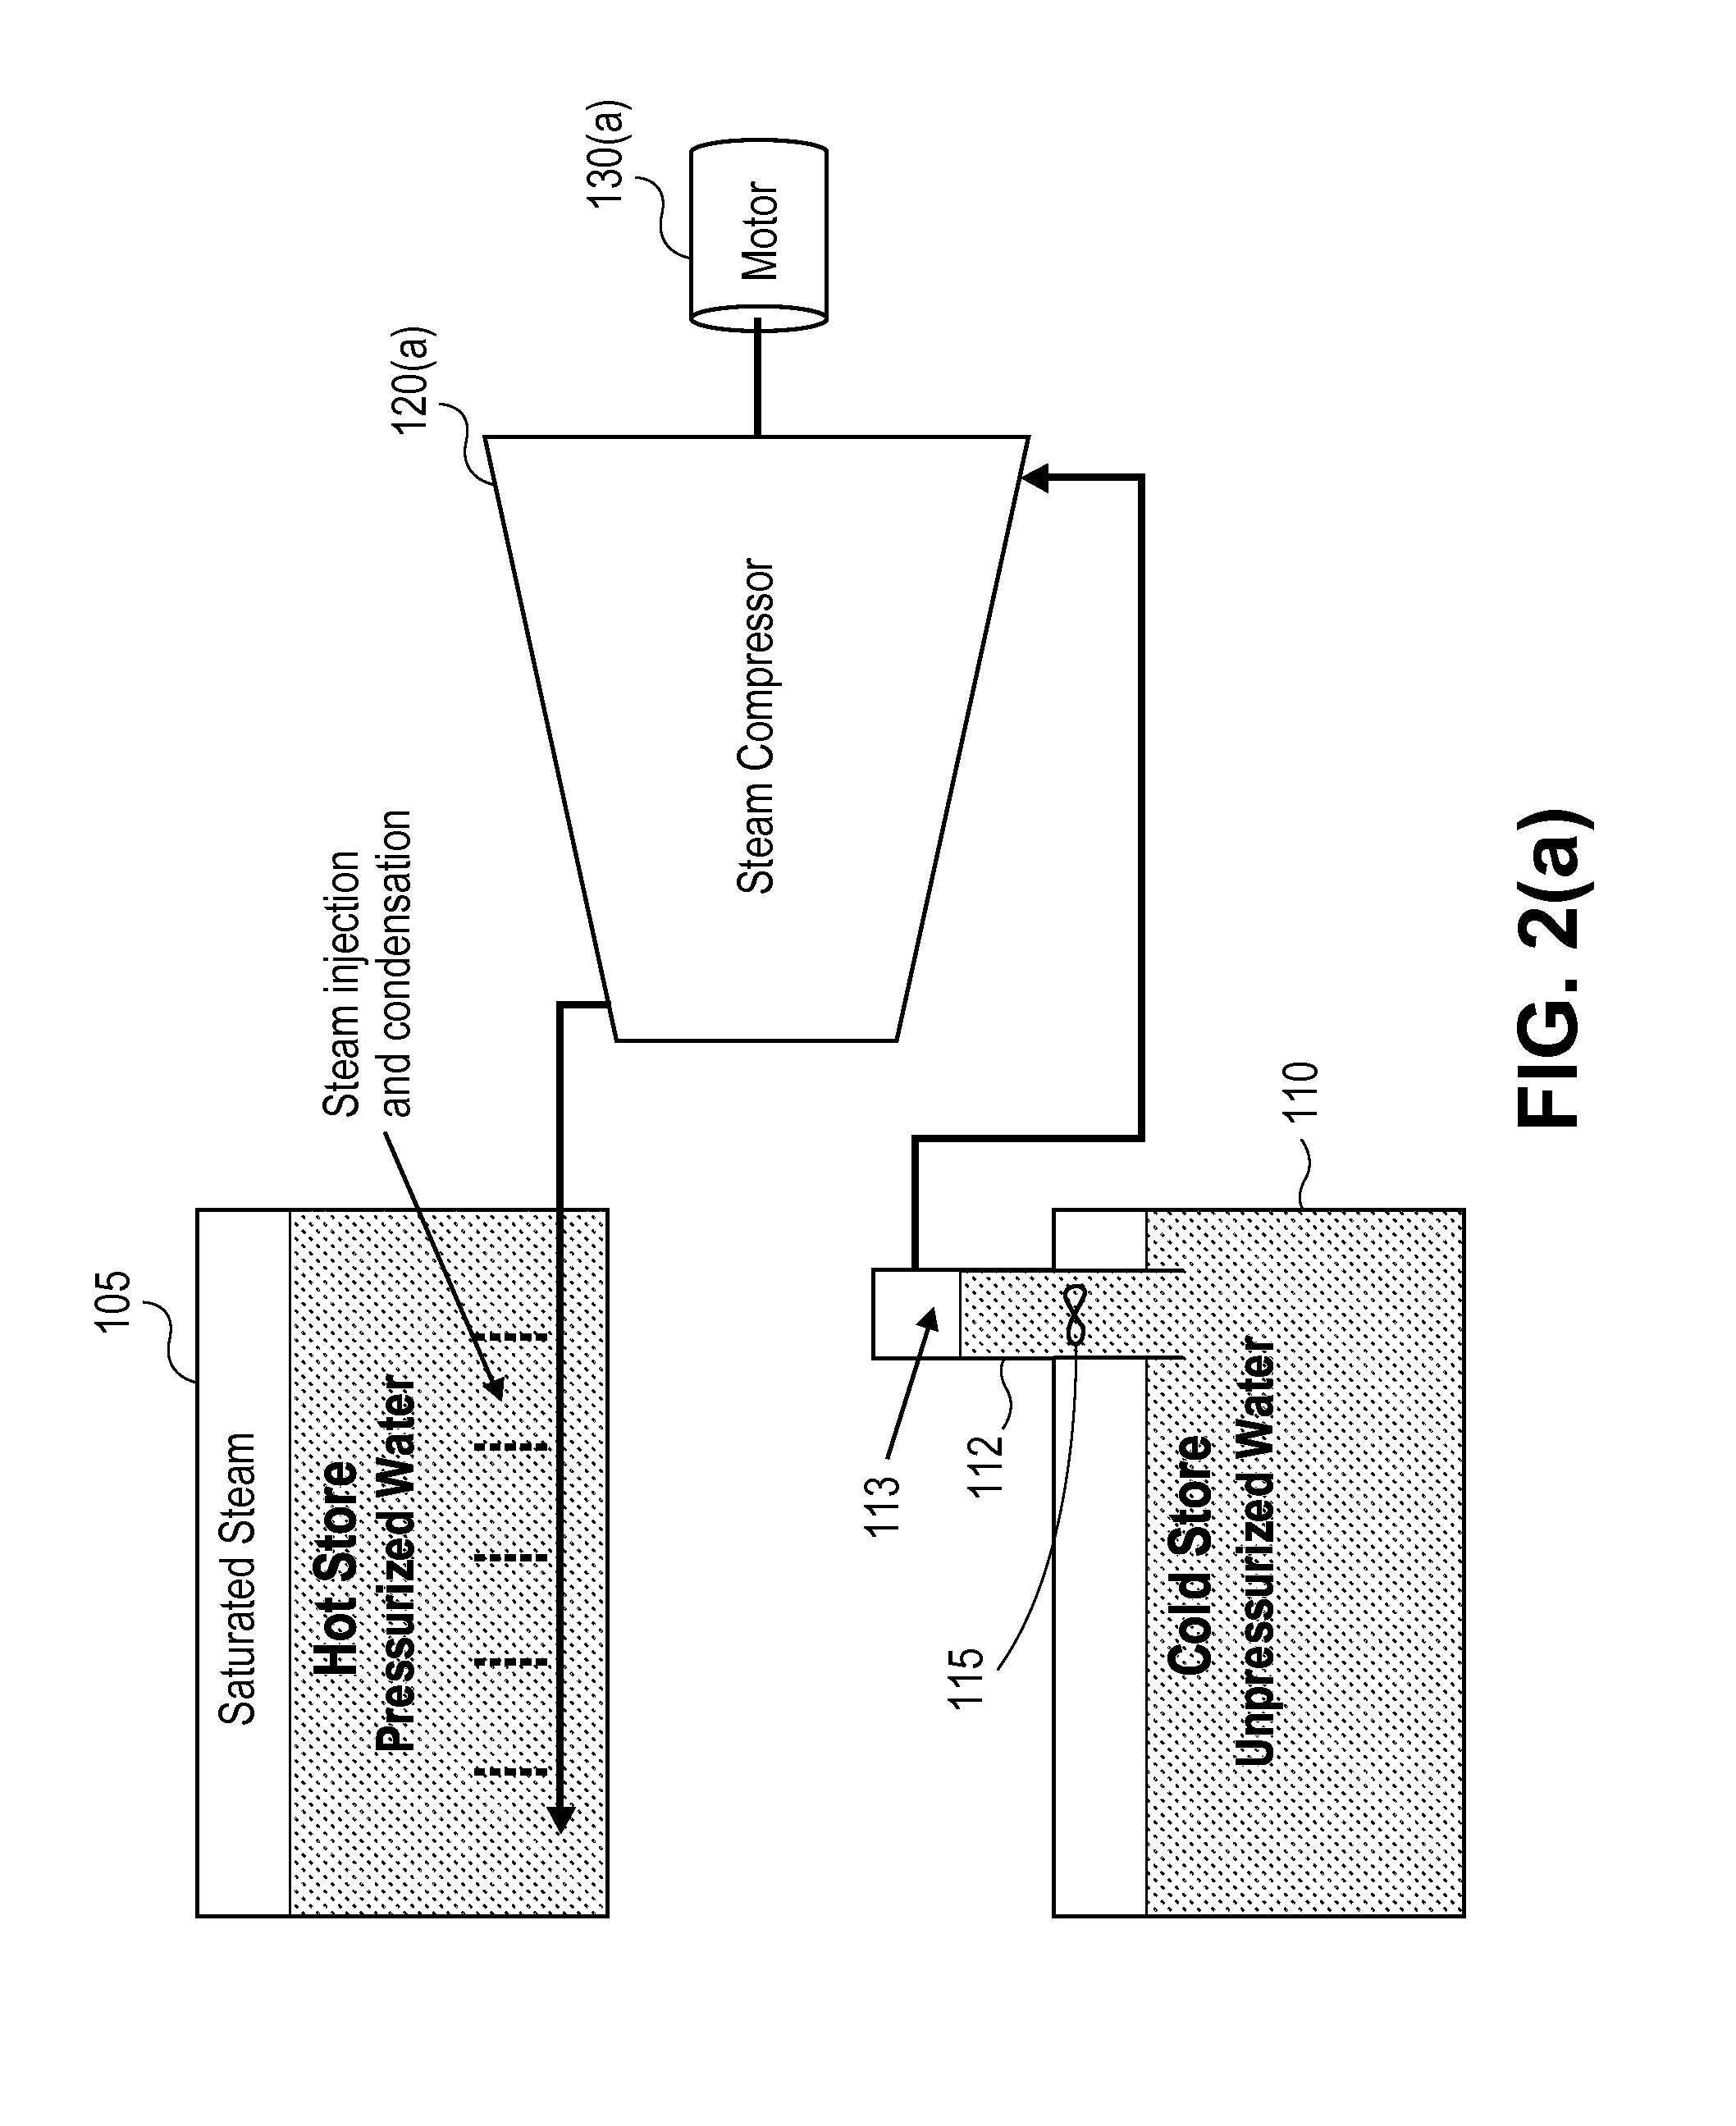 Thermal energy storage system